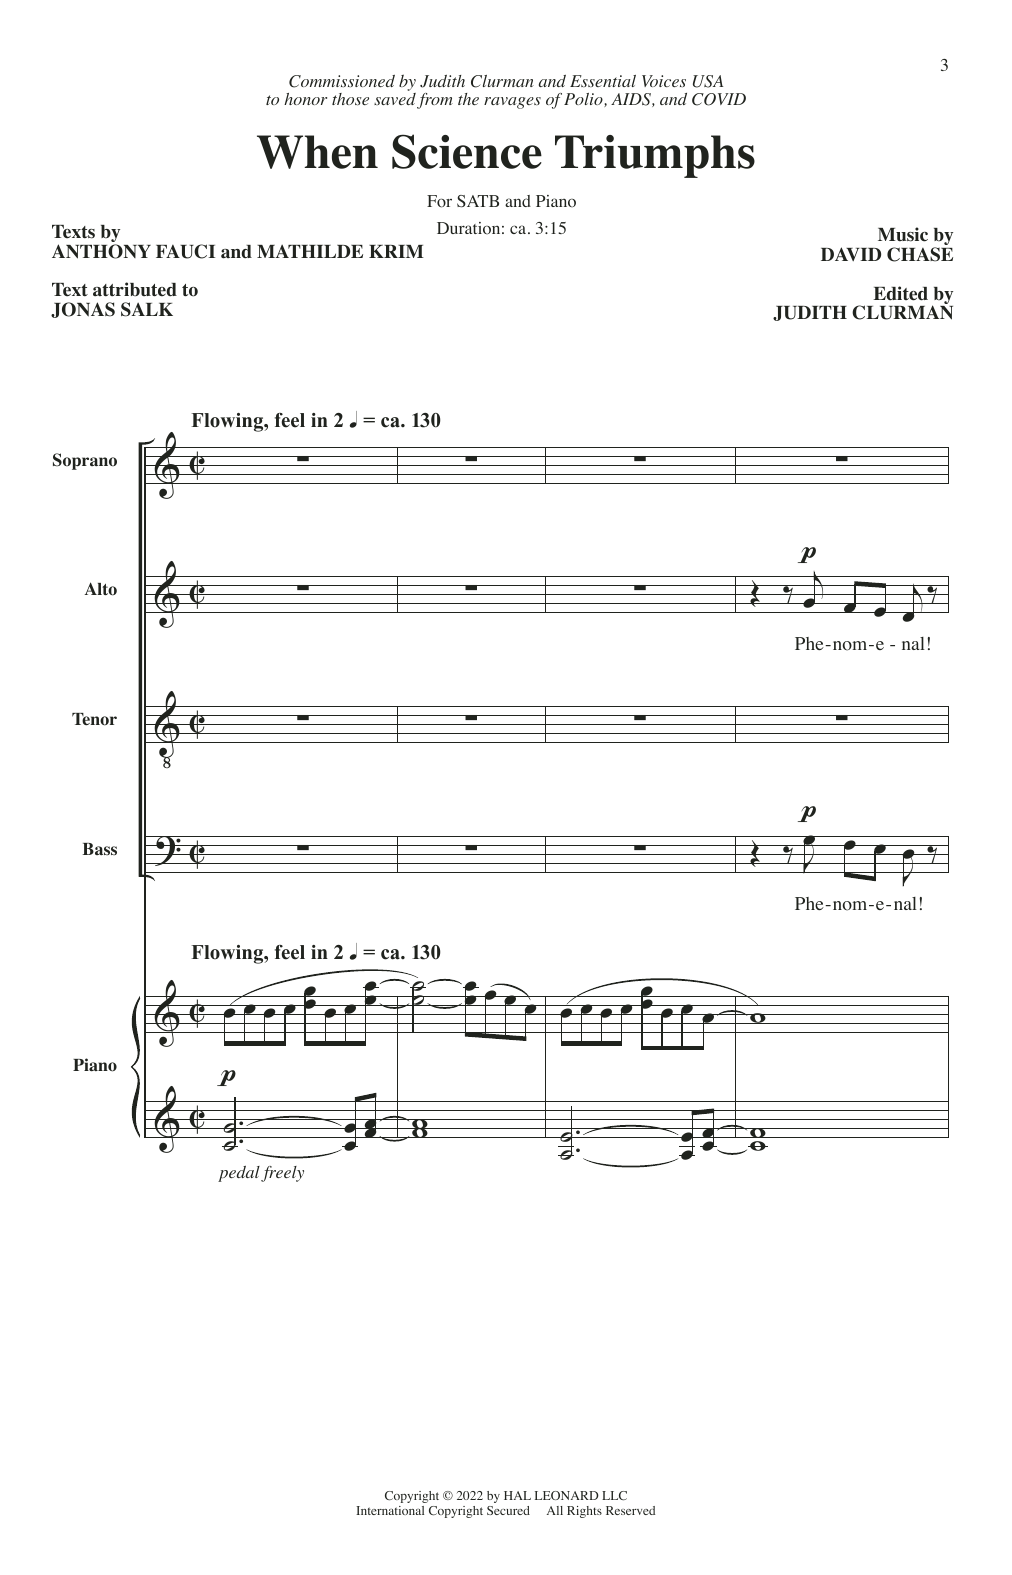 Download David Chase When Science Triumphs Sheet Music